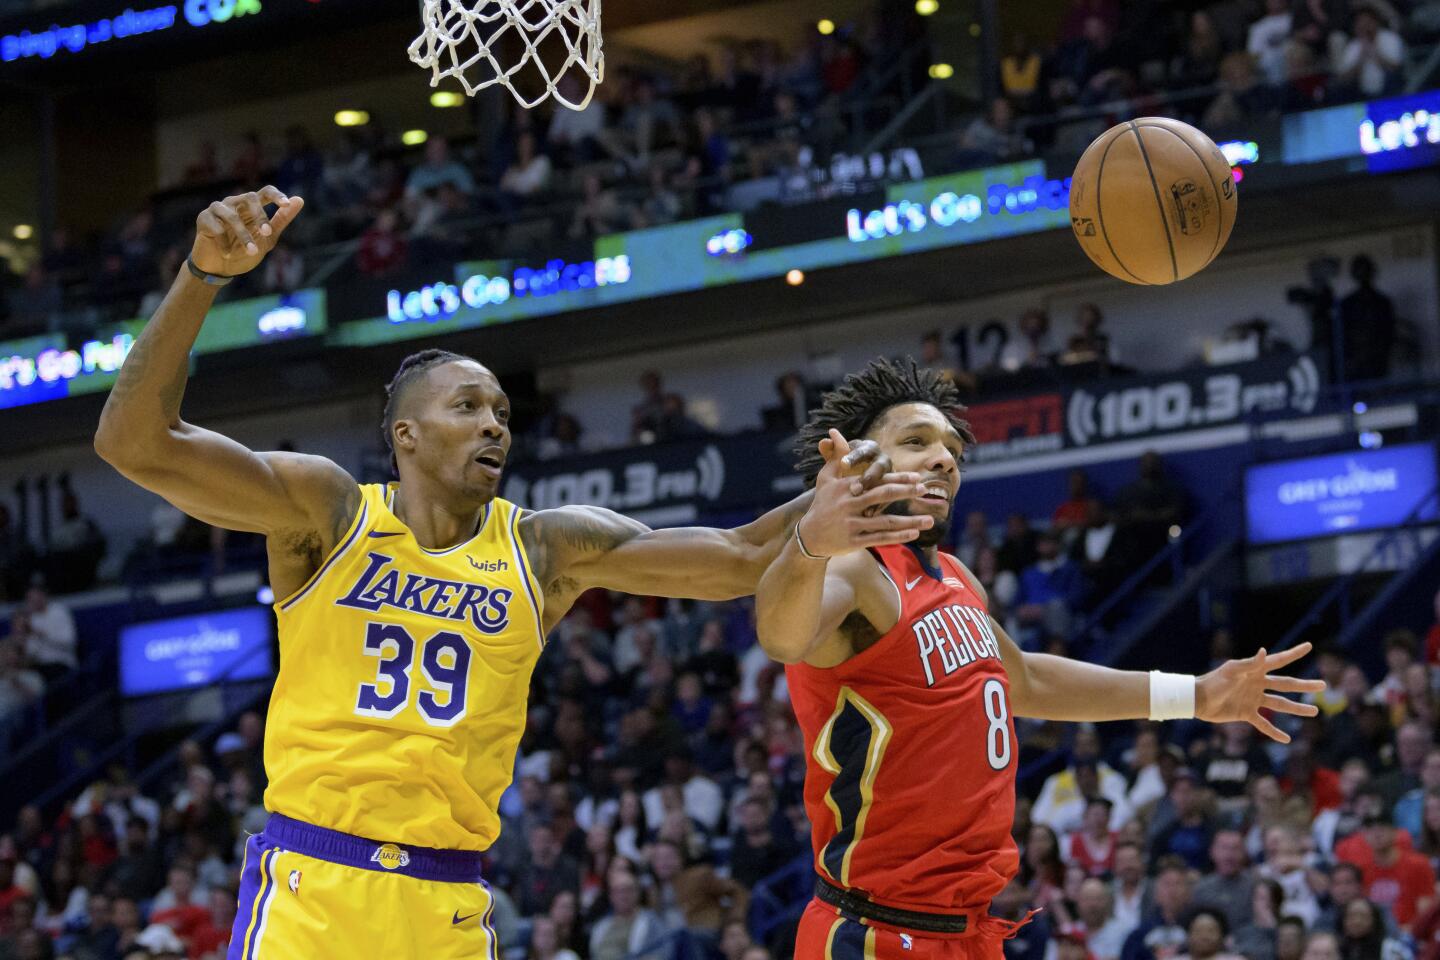 Pelicans center Jahlil Okafor (8) and Lakers center Dwight Howard (39) reach for a rebound during the second half of a game Nov. 27.